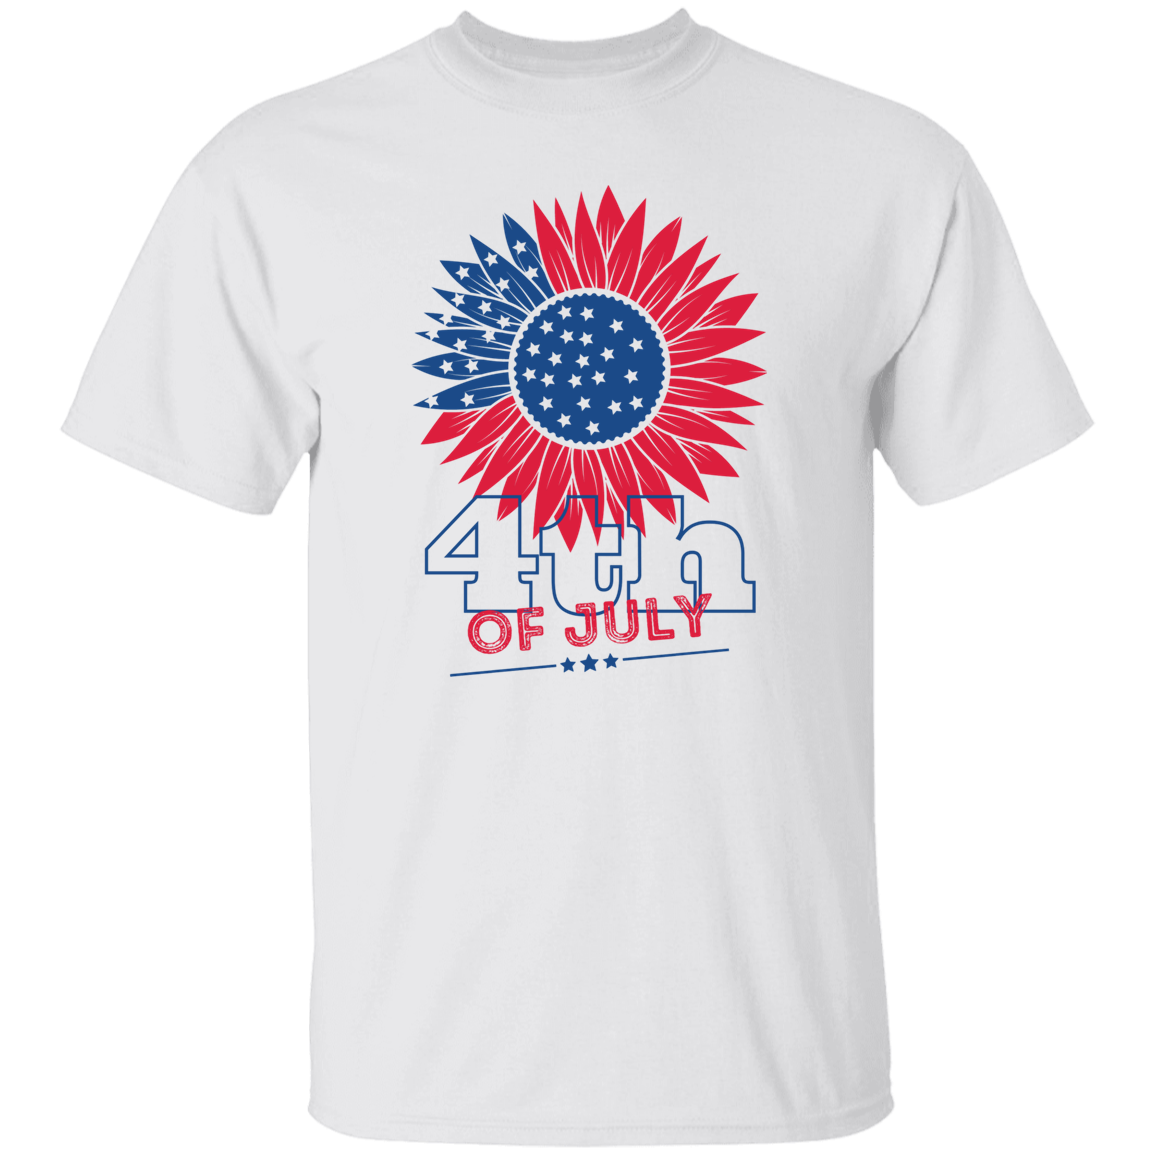 4TH OF JULY T SHIRT